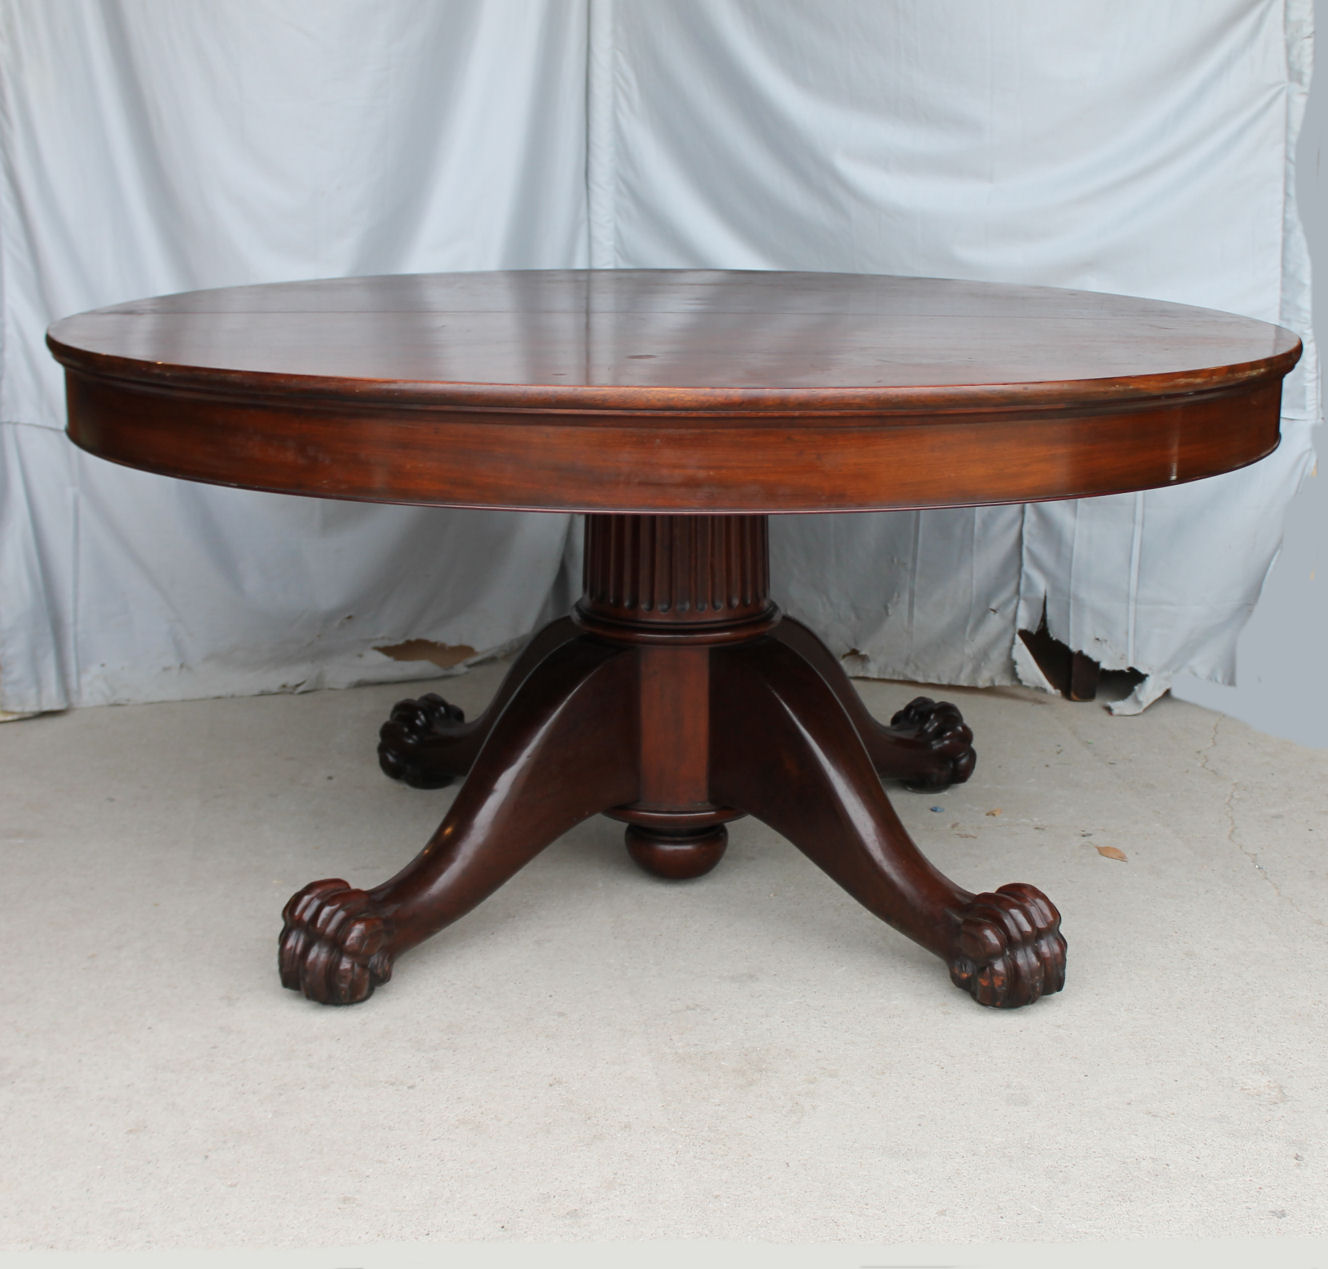 Bargain John's Antiques | Antique Mahogany Round Dining Room Table 5